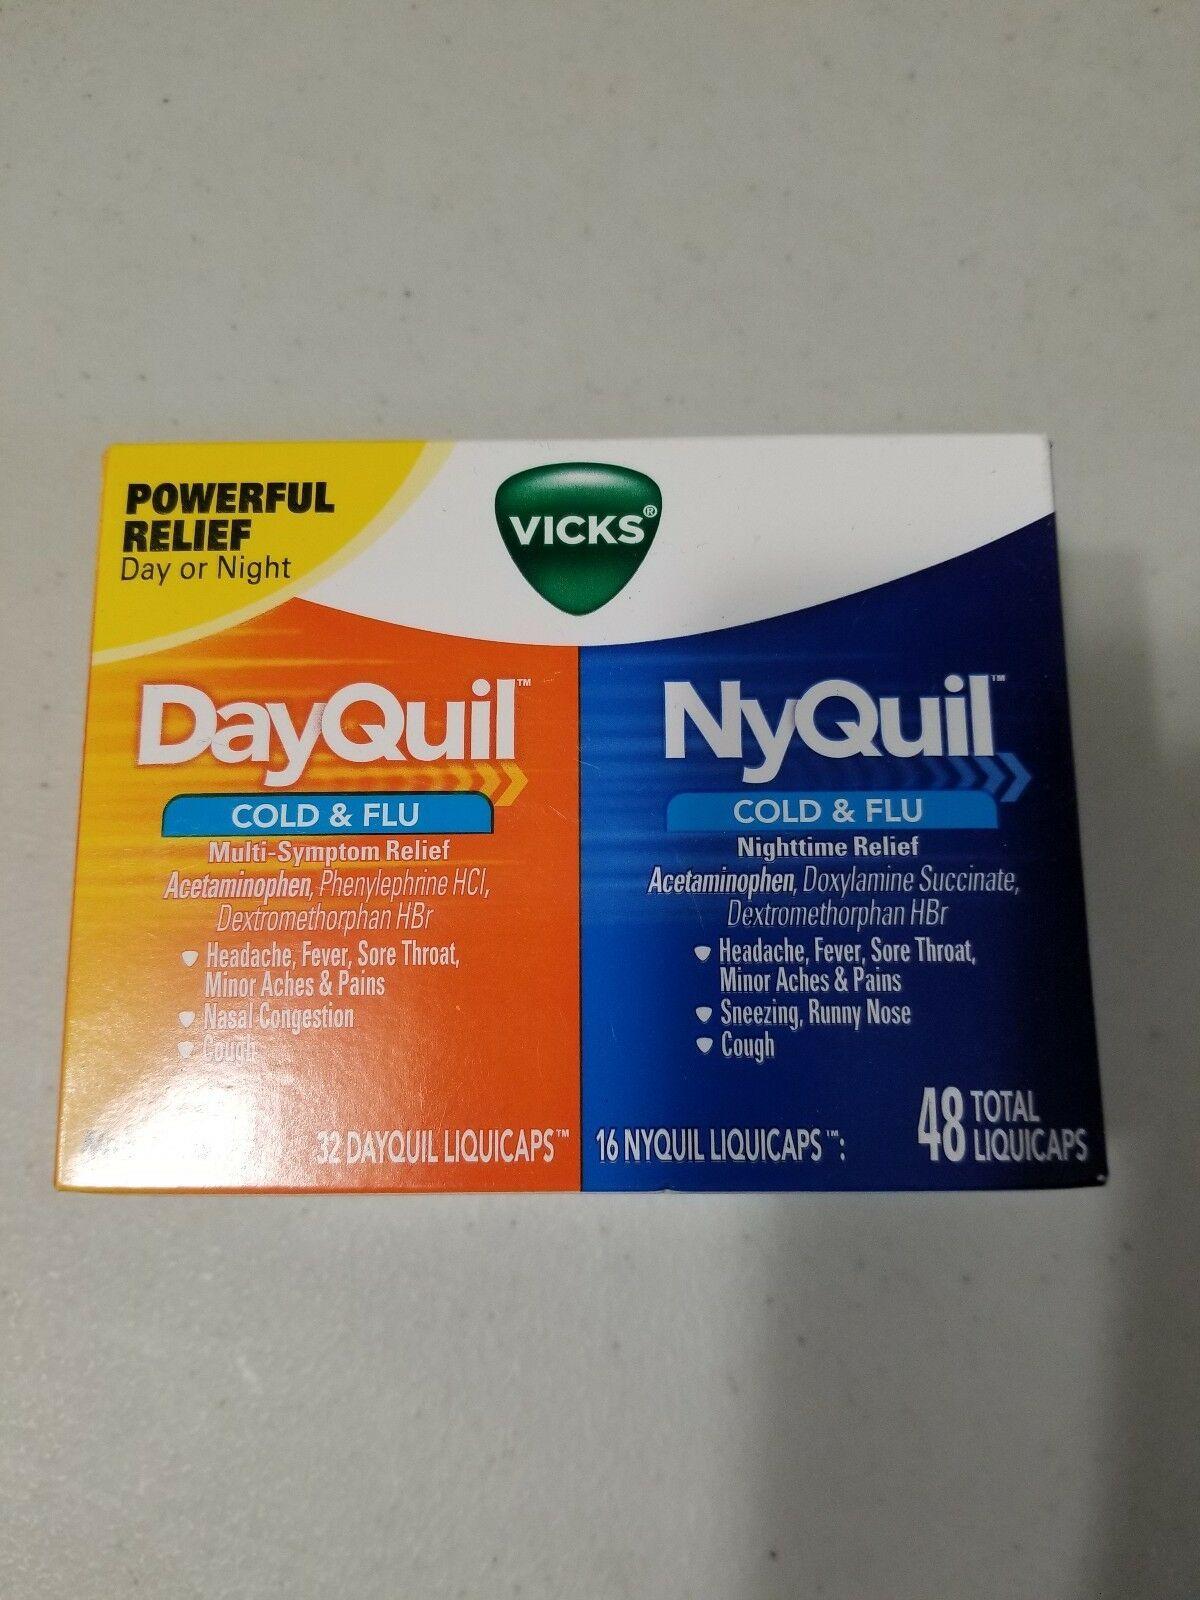 Dayquil Logo - Vicks DayQuil and NyQuil Cold & Flu Relief 48ct 323900014527a1190 | eBay